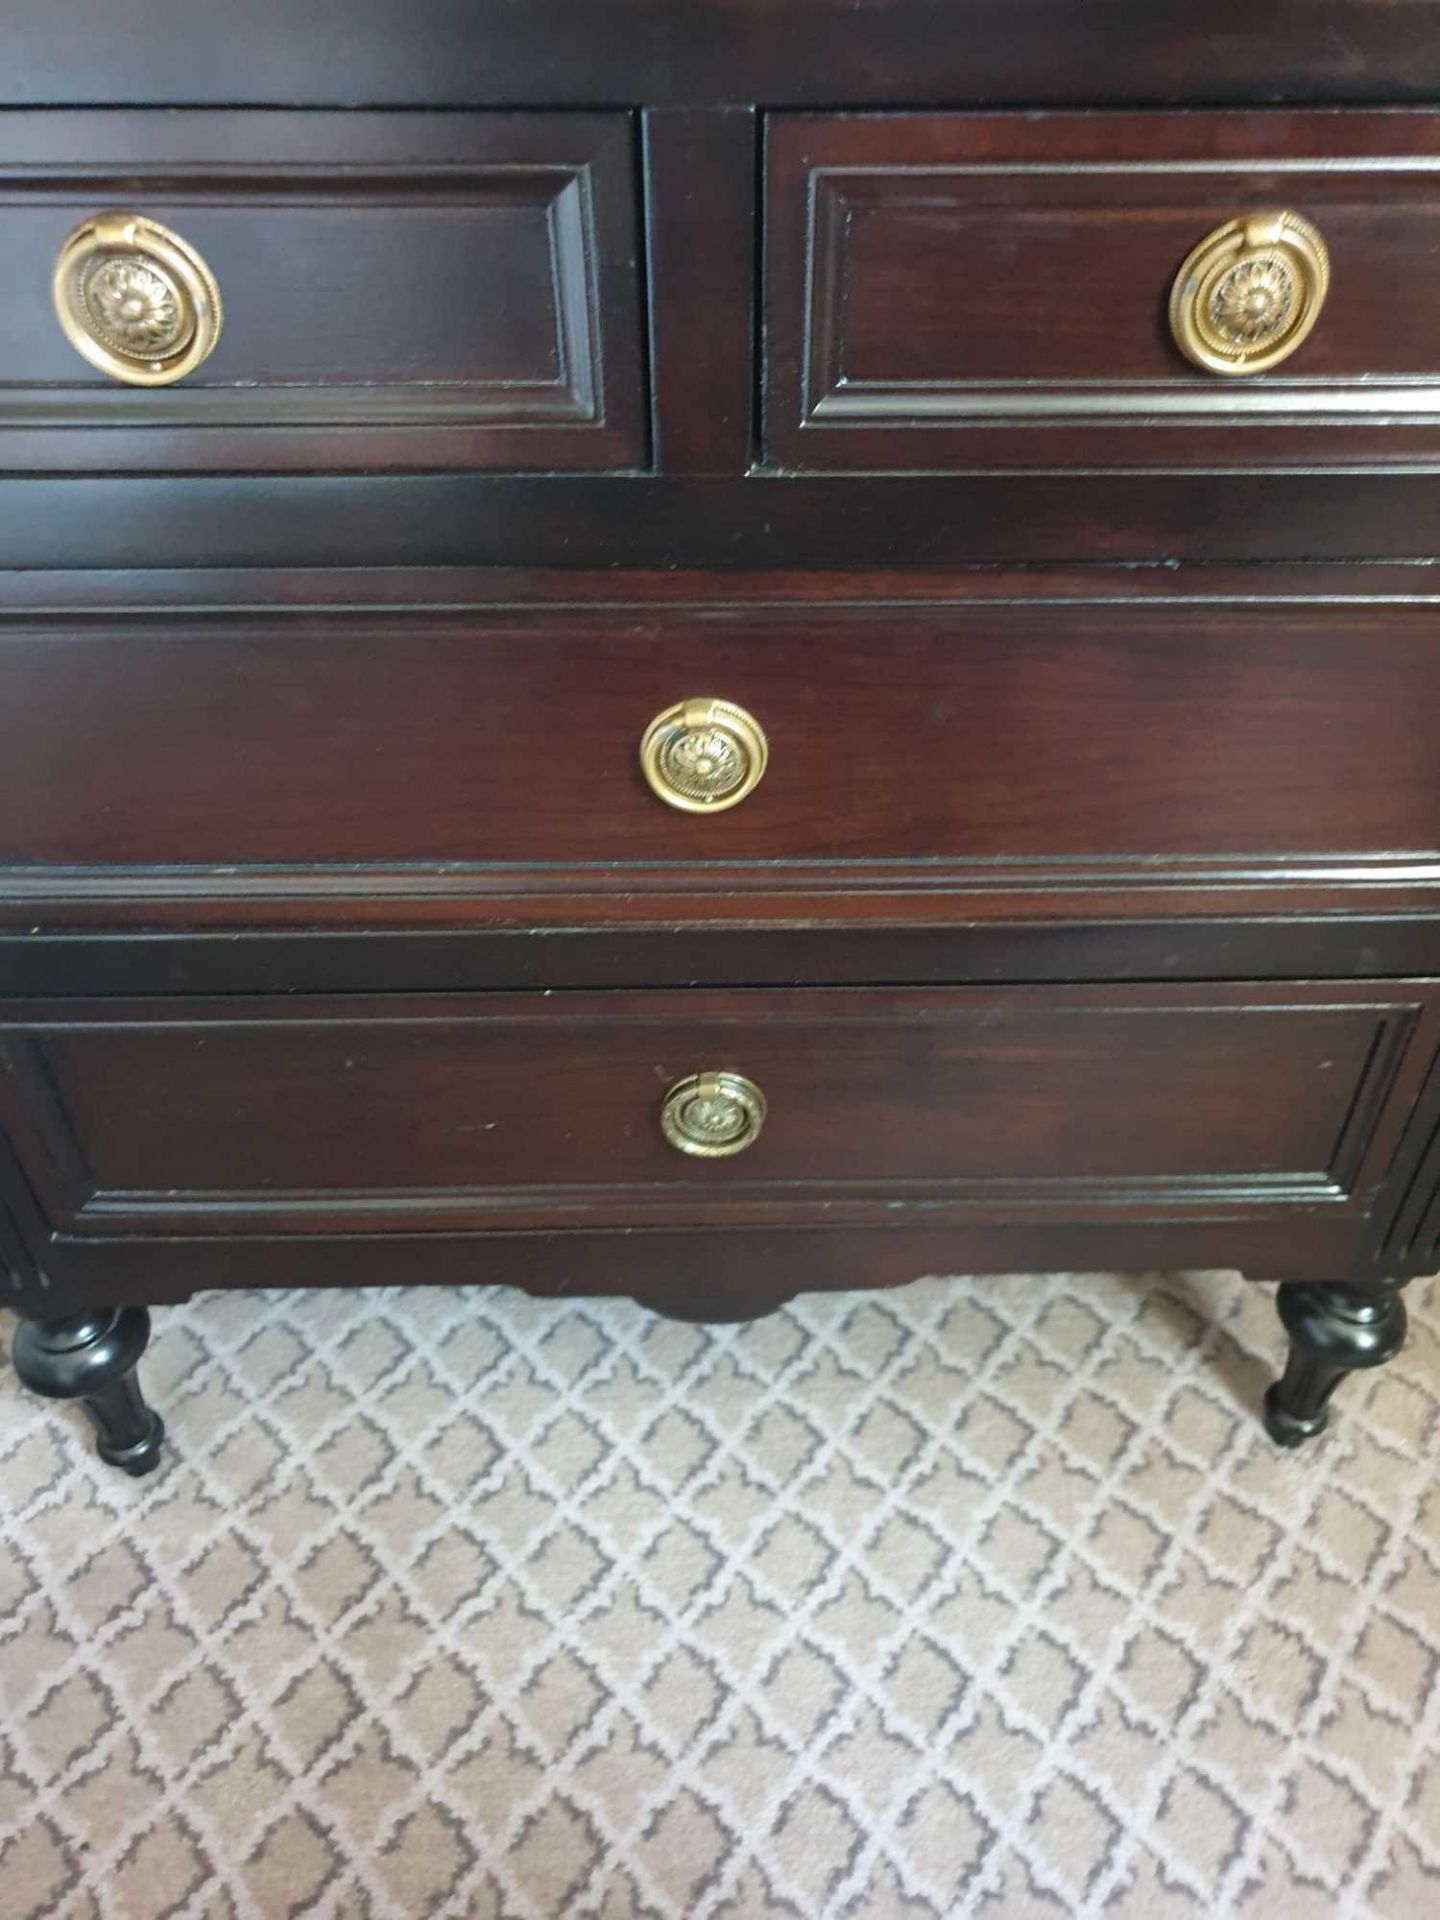 A Pair Four Drawer Mirrored Top Commode Chests Raised By Four Block Feet With A Square Carved - Image 3 of 3